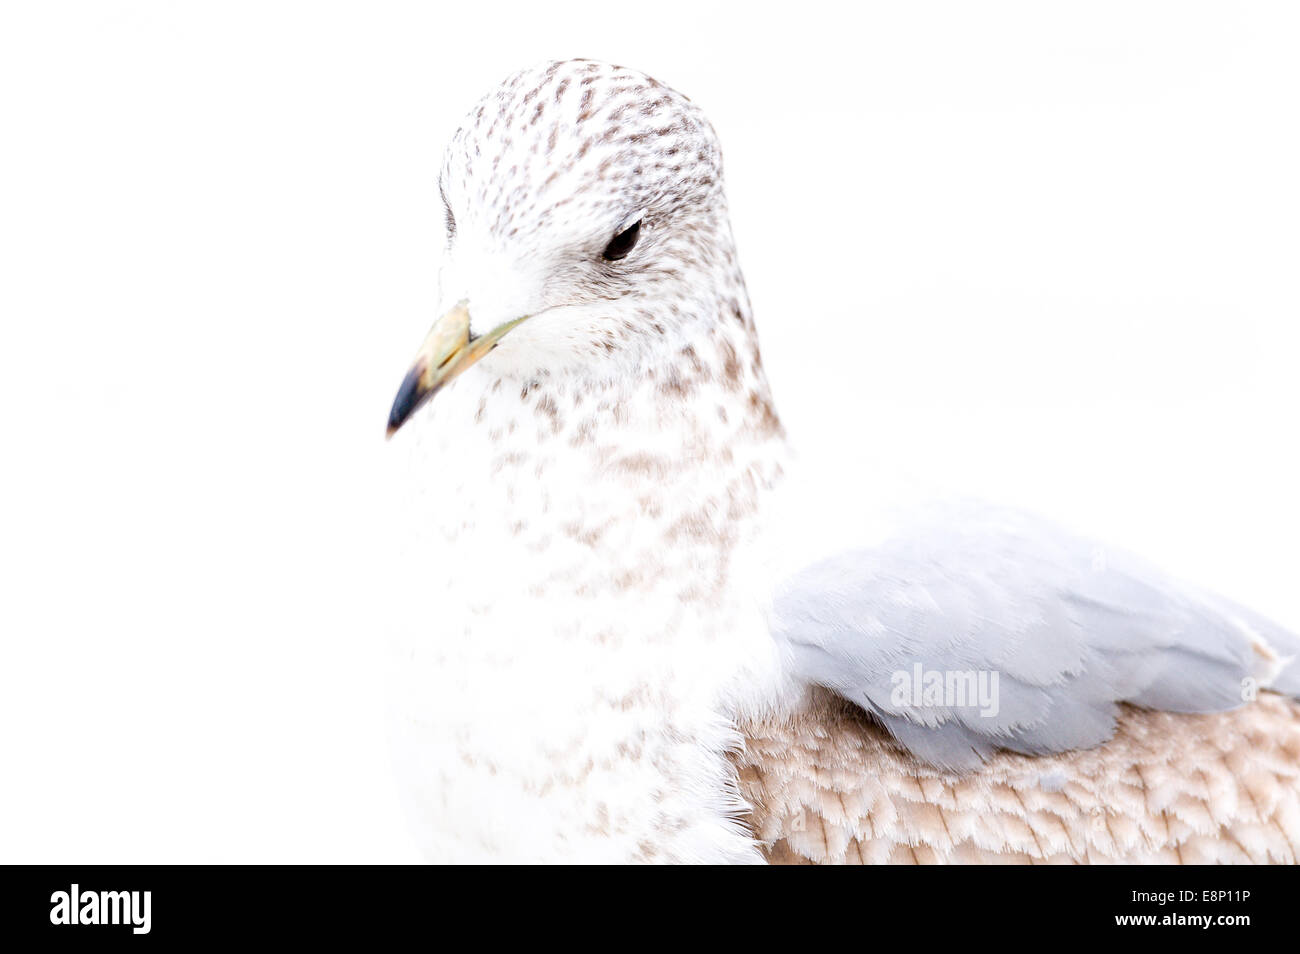 Norway, Stavanger. Young Common Gull. Stock Photo